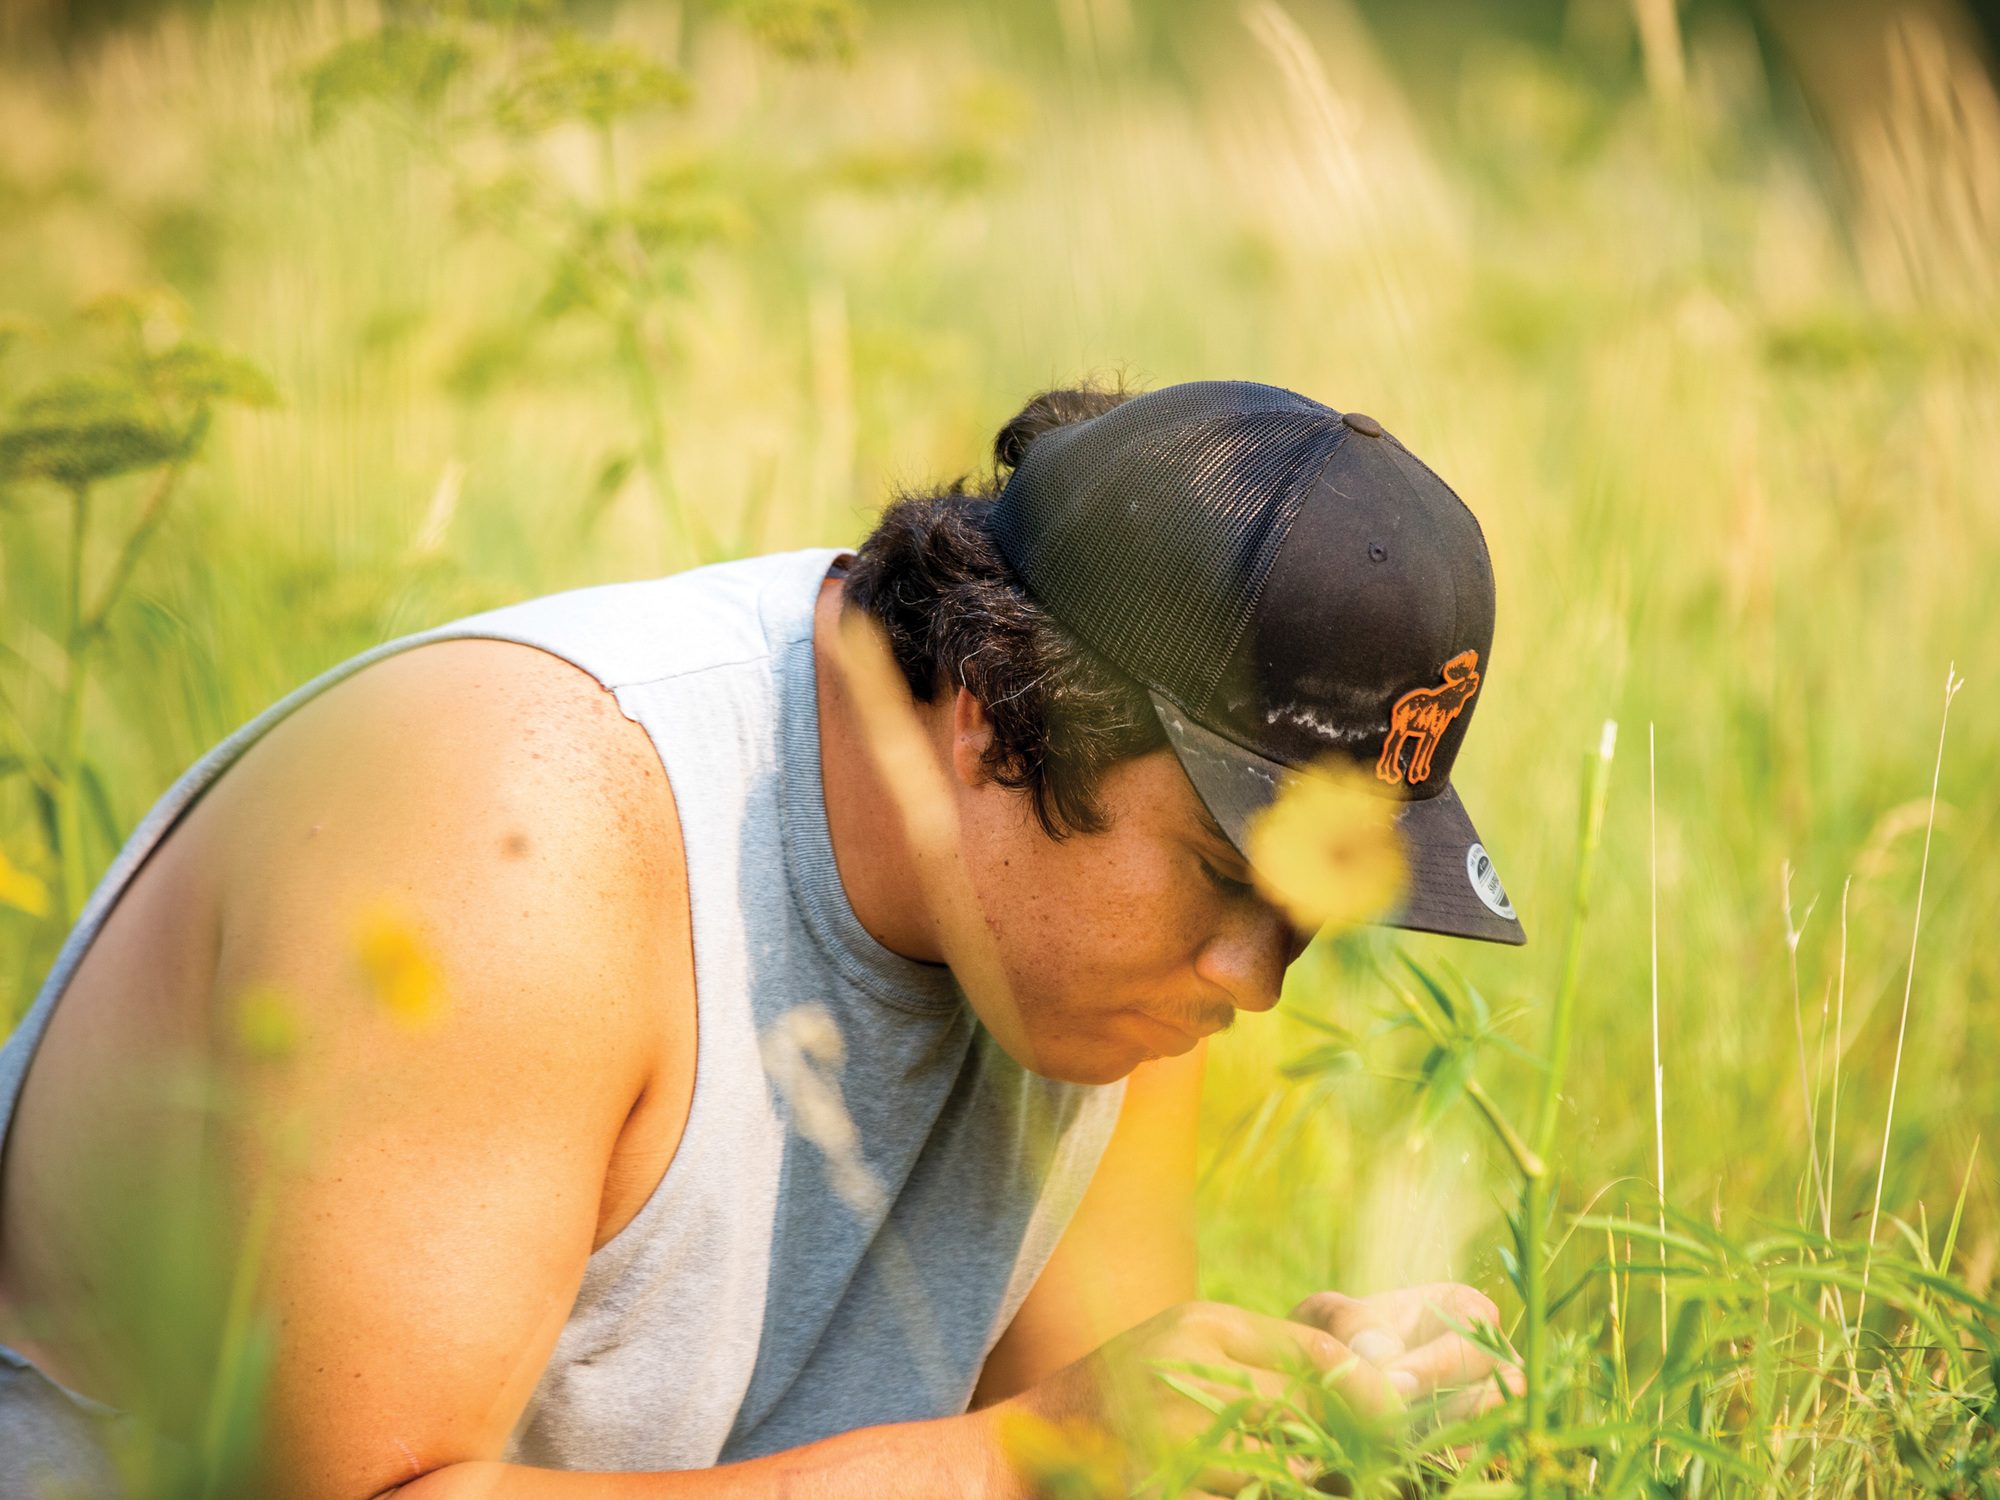 Tyrus Brockie, a member of the Aaniih Tribe, collect seeds on the Fort Belknap Reservation in Montana as part of a grasslands restoration partnership between the Fort Belknap Indian Community and the Bureau of Land Management. October 2021